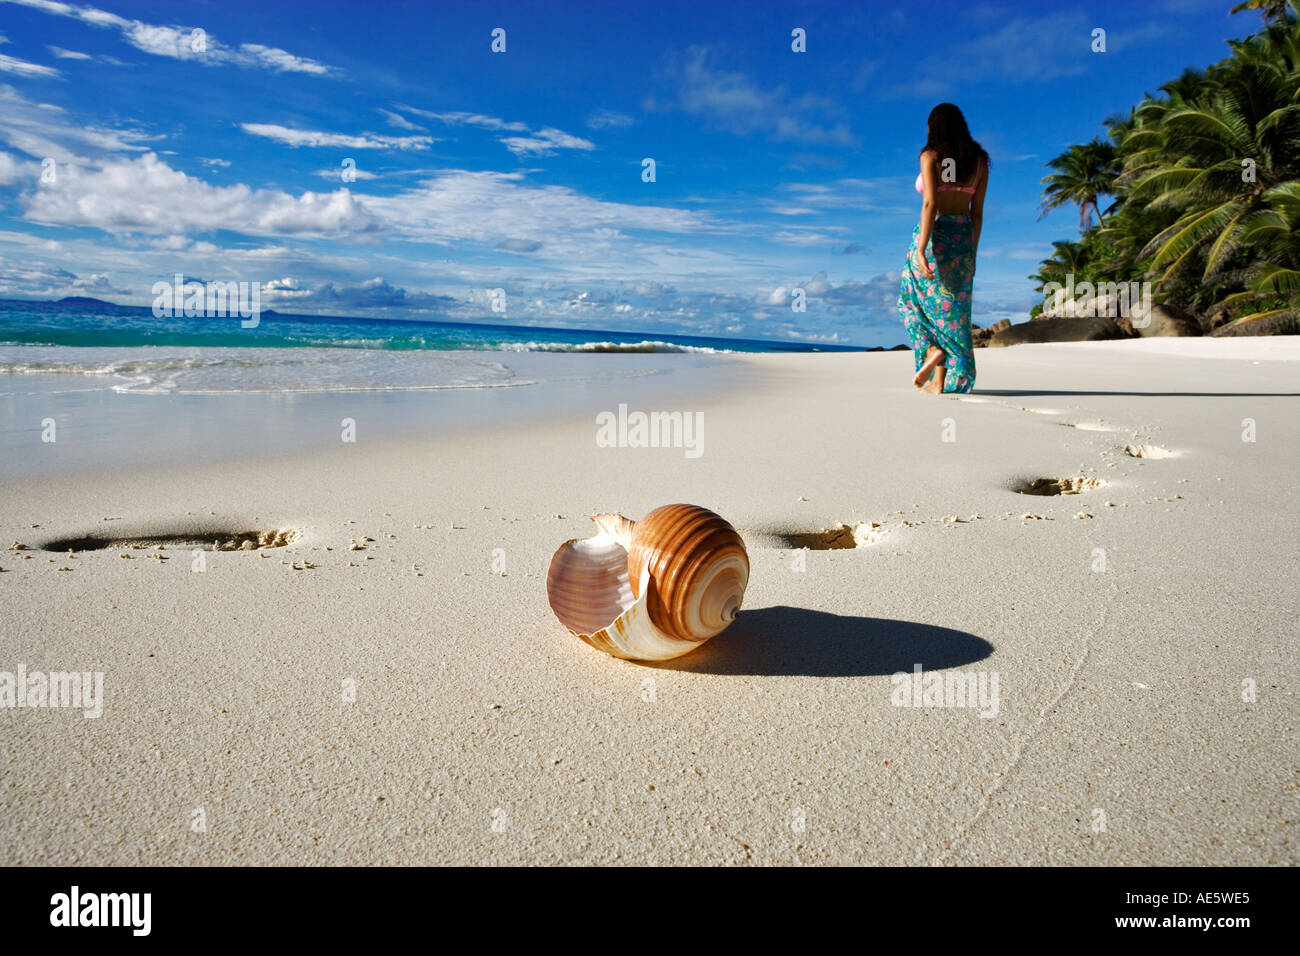 Woman walking on beach with sea shell in foreground Anse Victorin beach and palm trees Fregate Island Seychelles Stock Photo